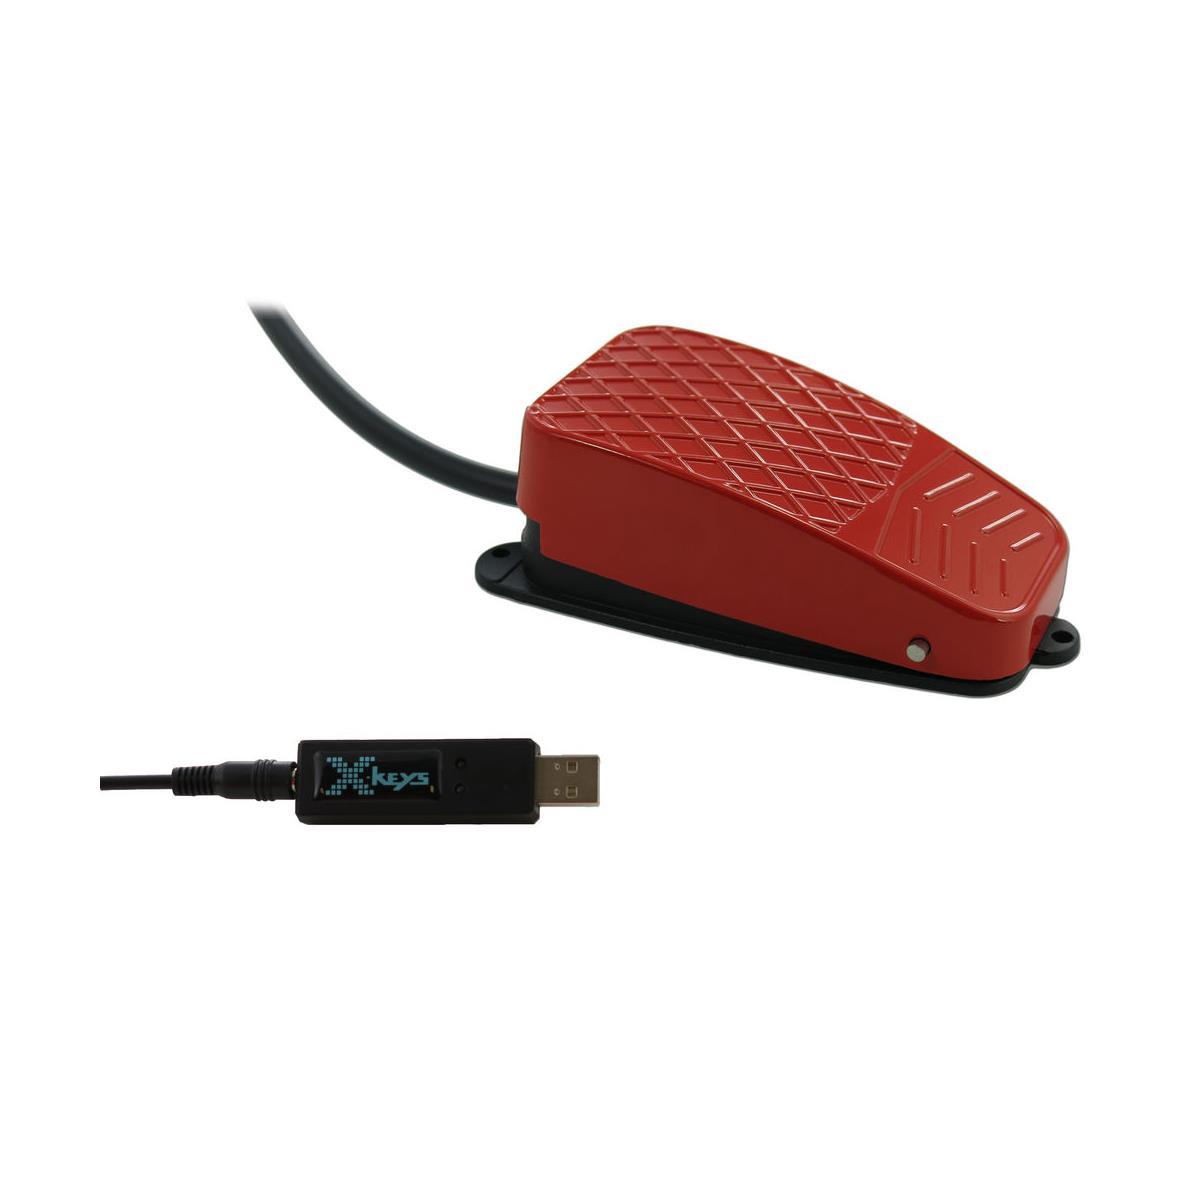 Image of X-Keys USB Three-Switch Interface with Red Commercial Foot Switch